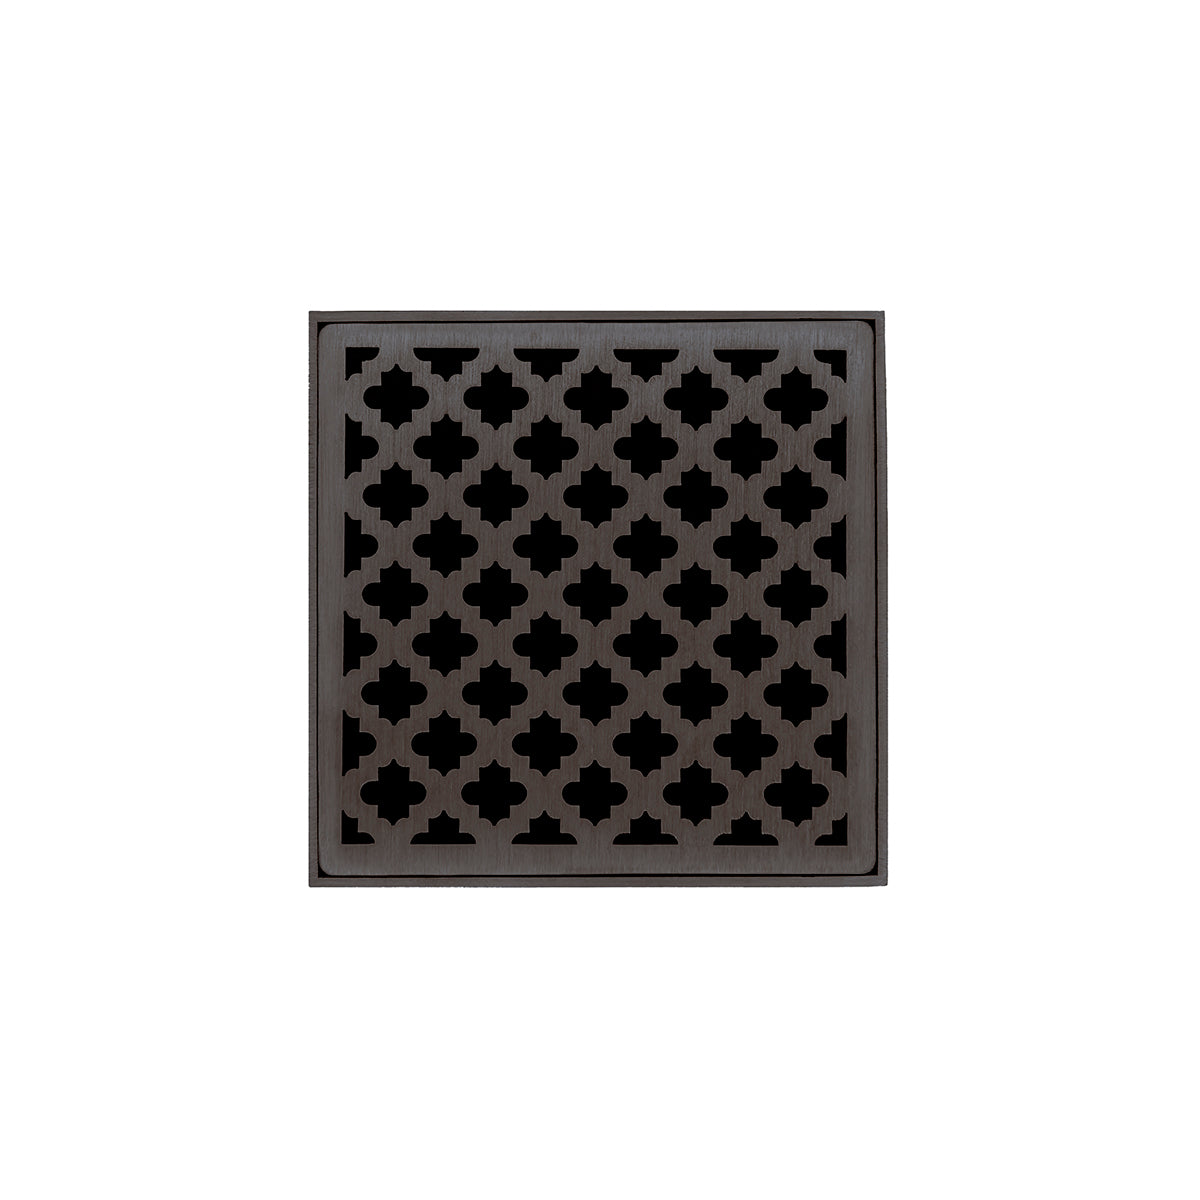 Infinity Drain 4" x 4" MD 4 Premium Center Drain Kit with Moor Pattern Decorative Plate with ABS Drain Body, 2" Outlet